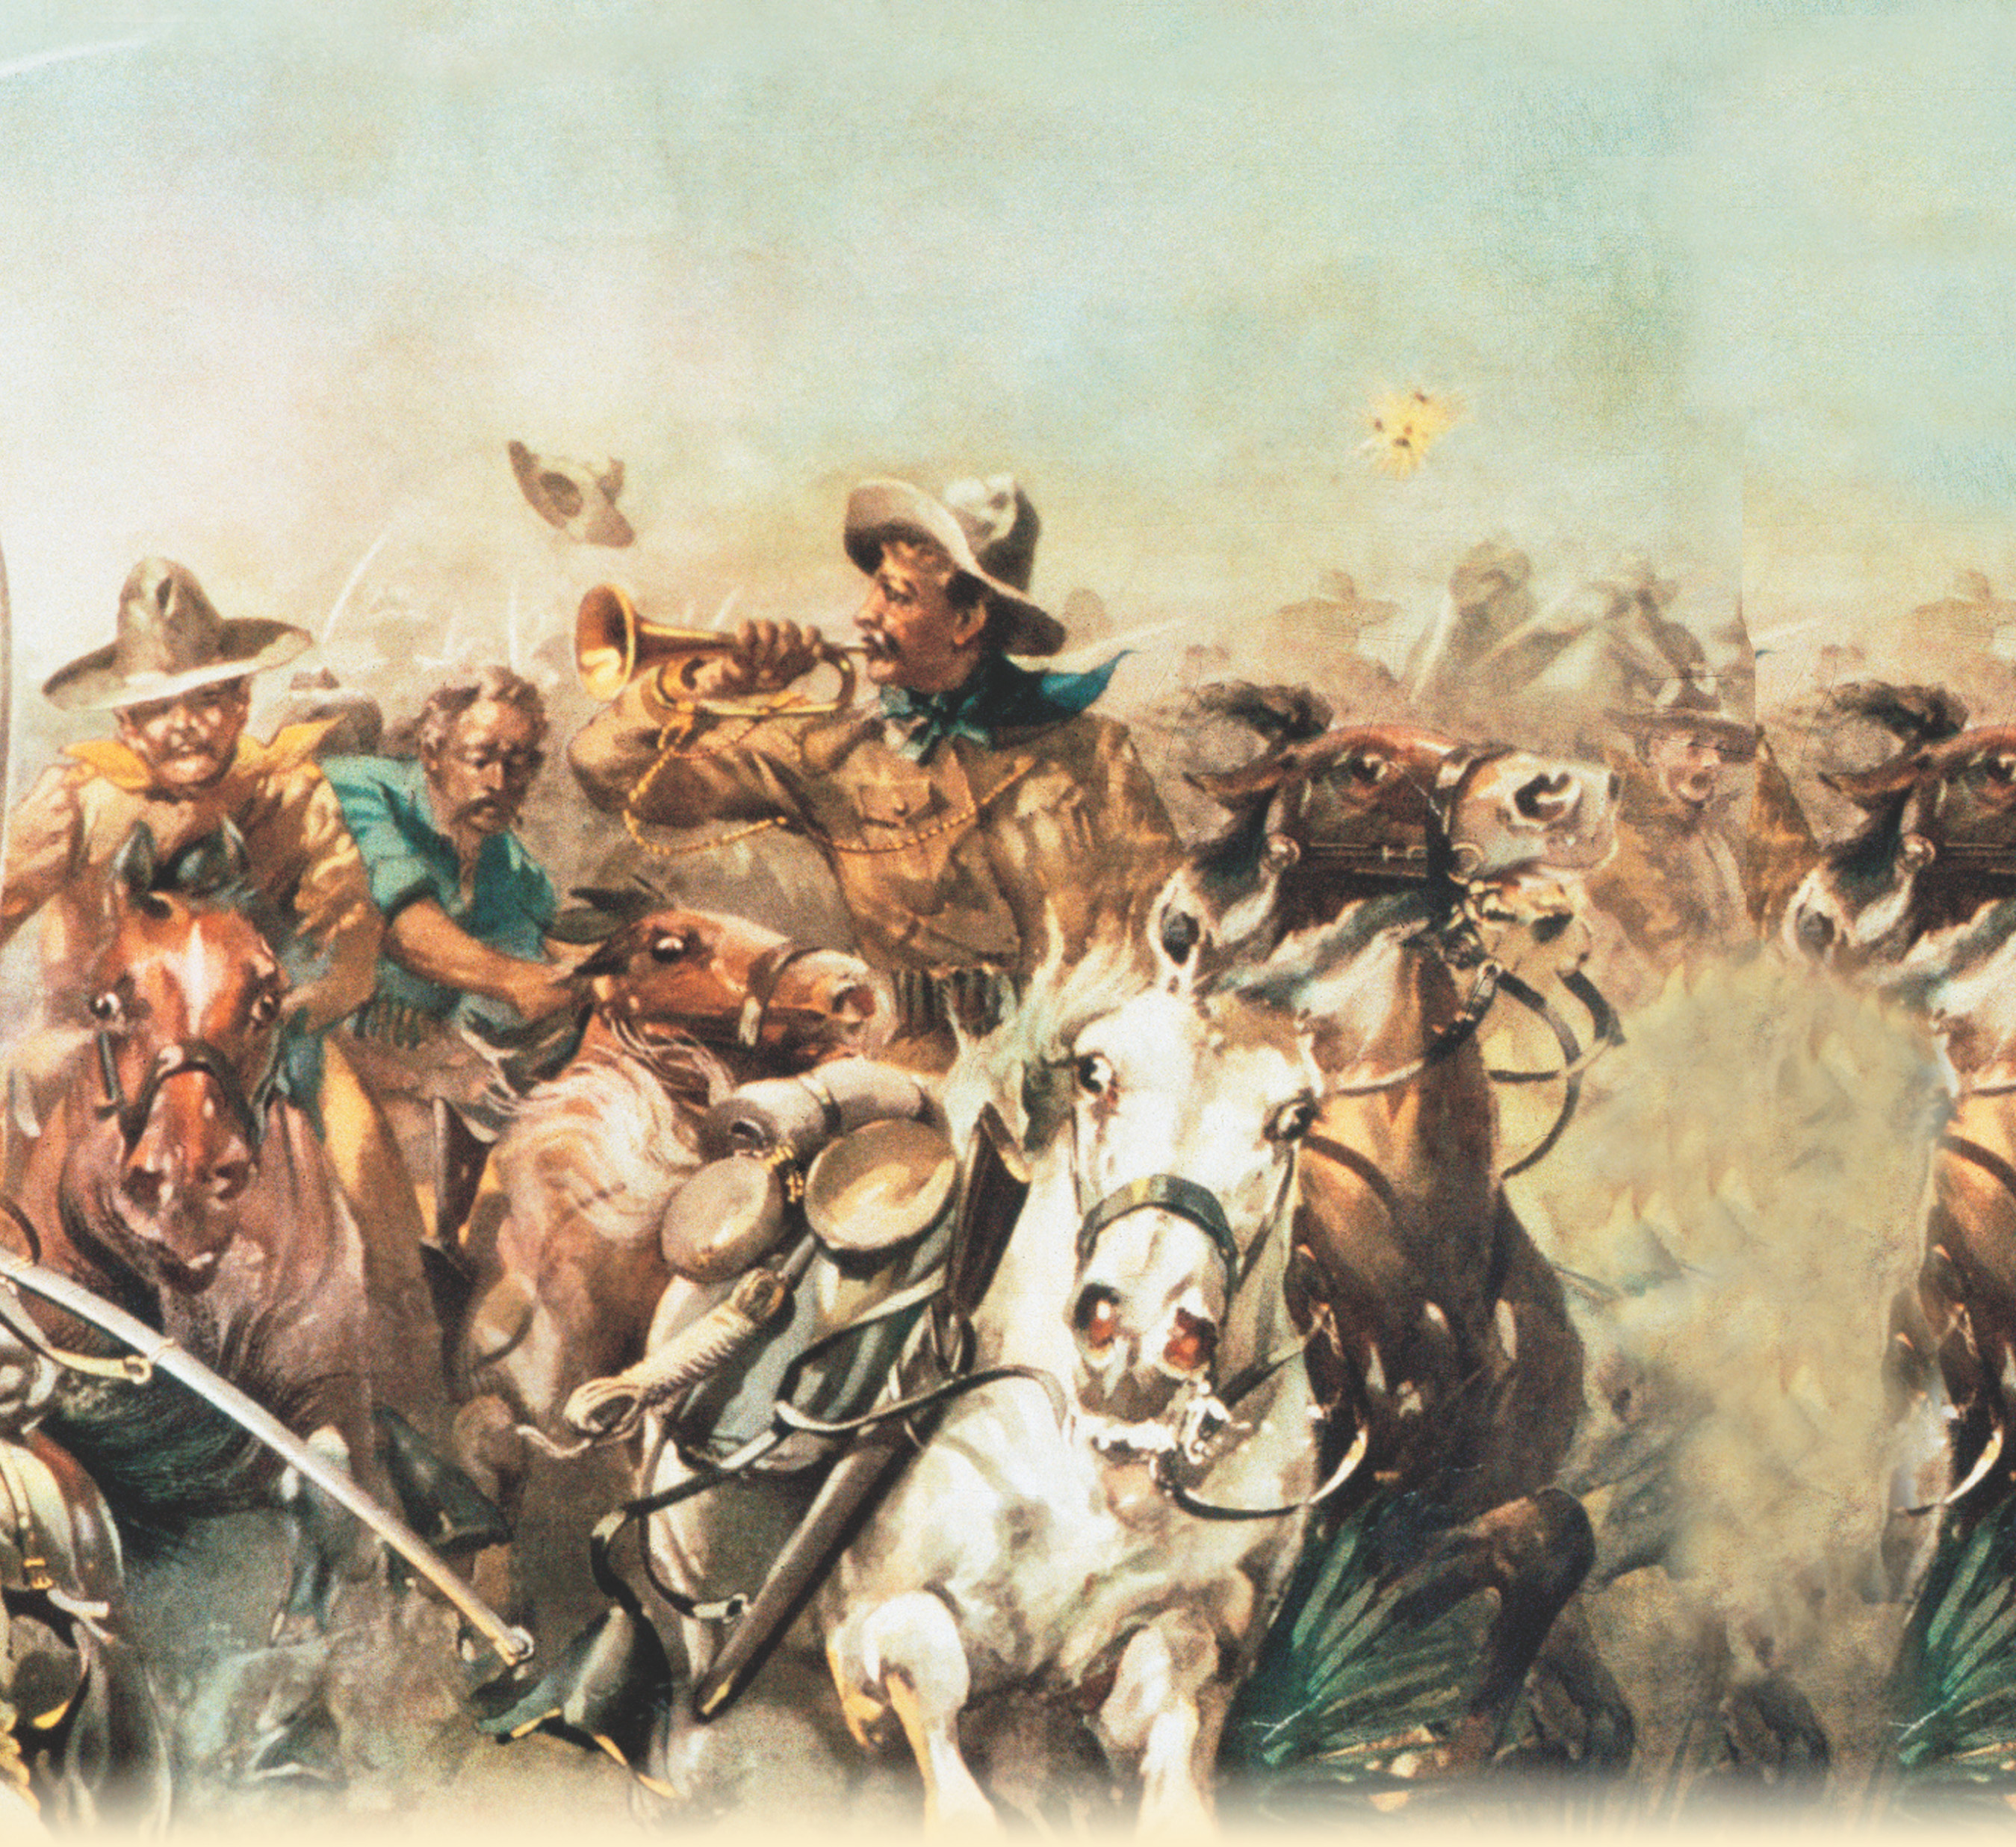 Lithograph: Roosevelt leads his Rough Riders on horseback